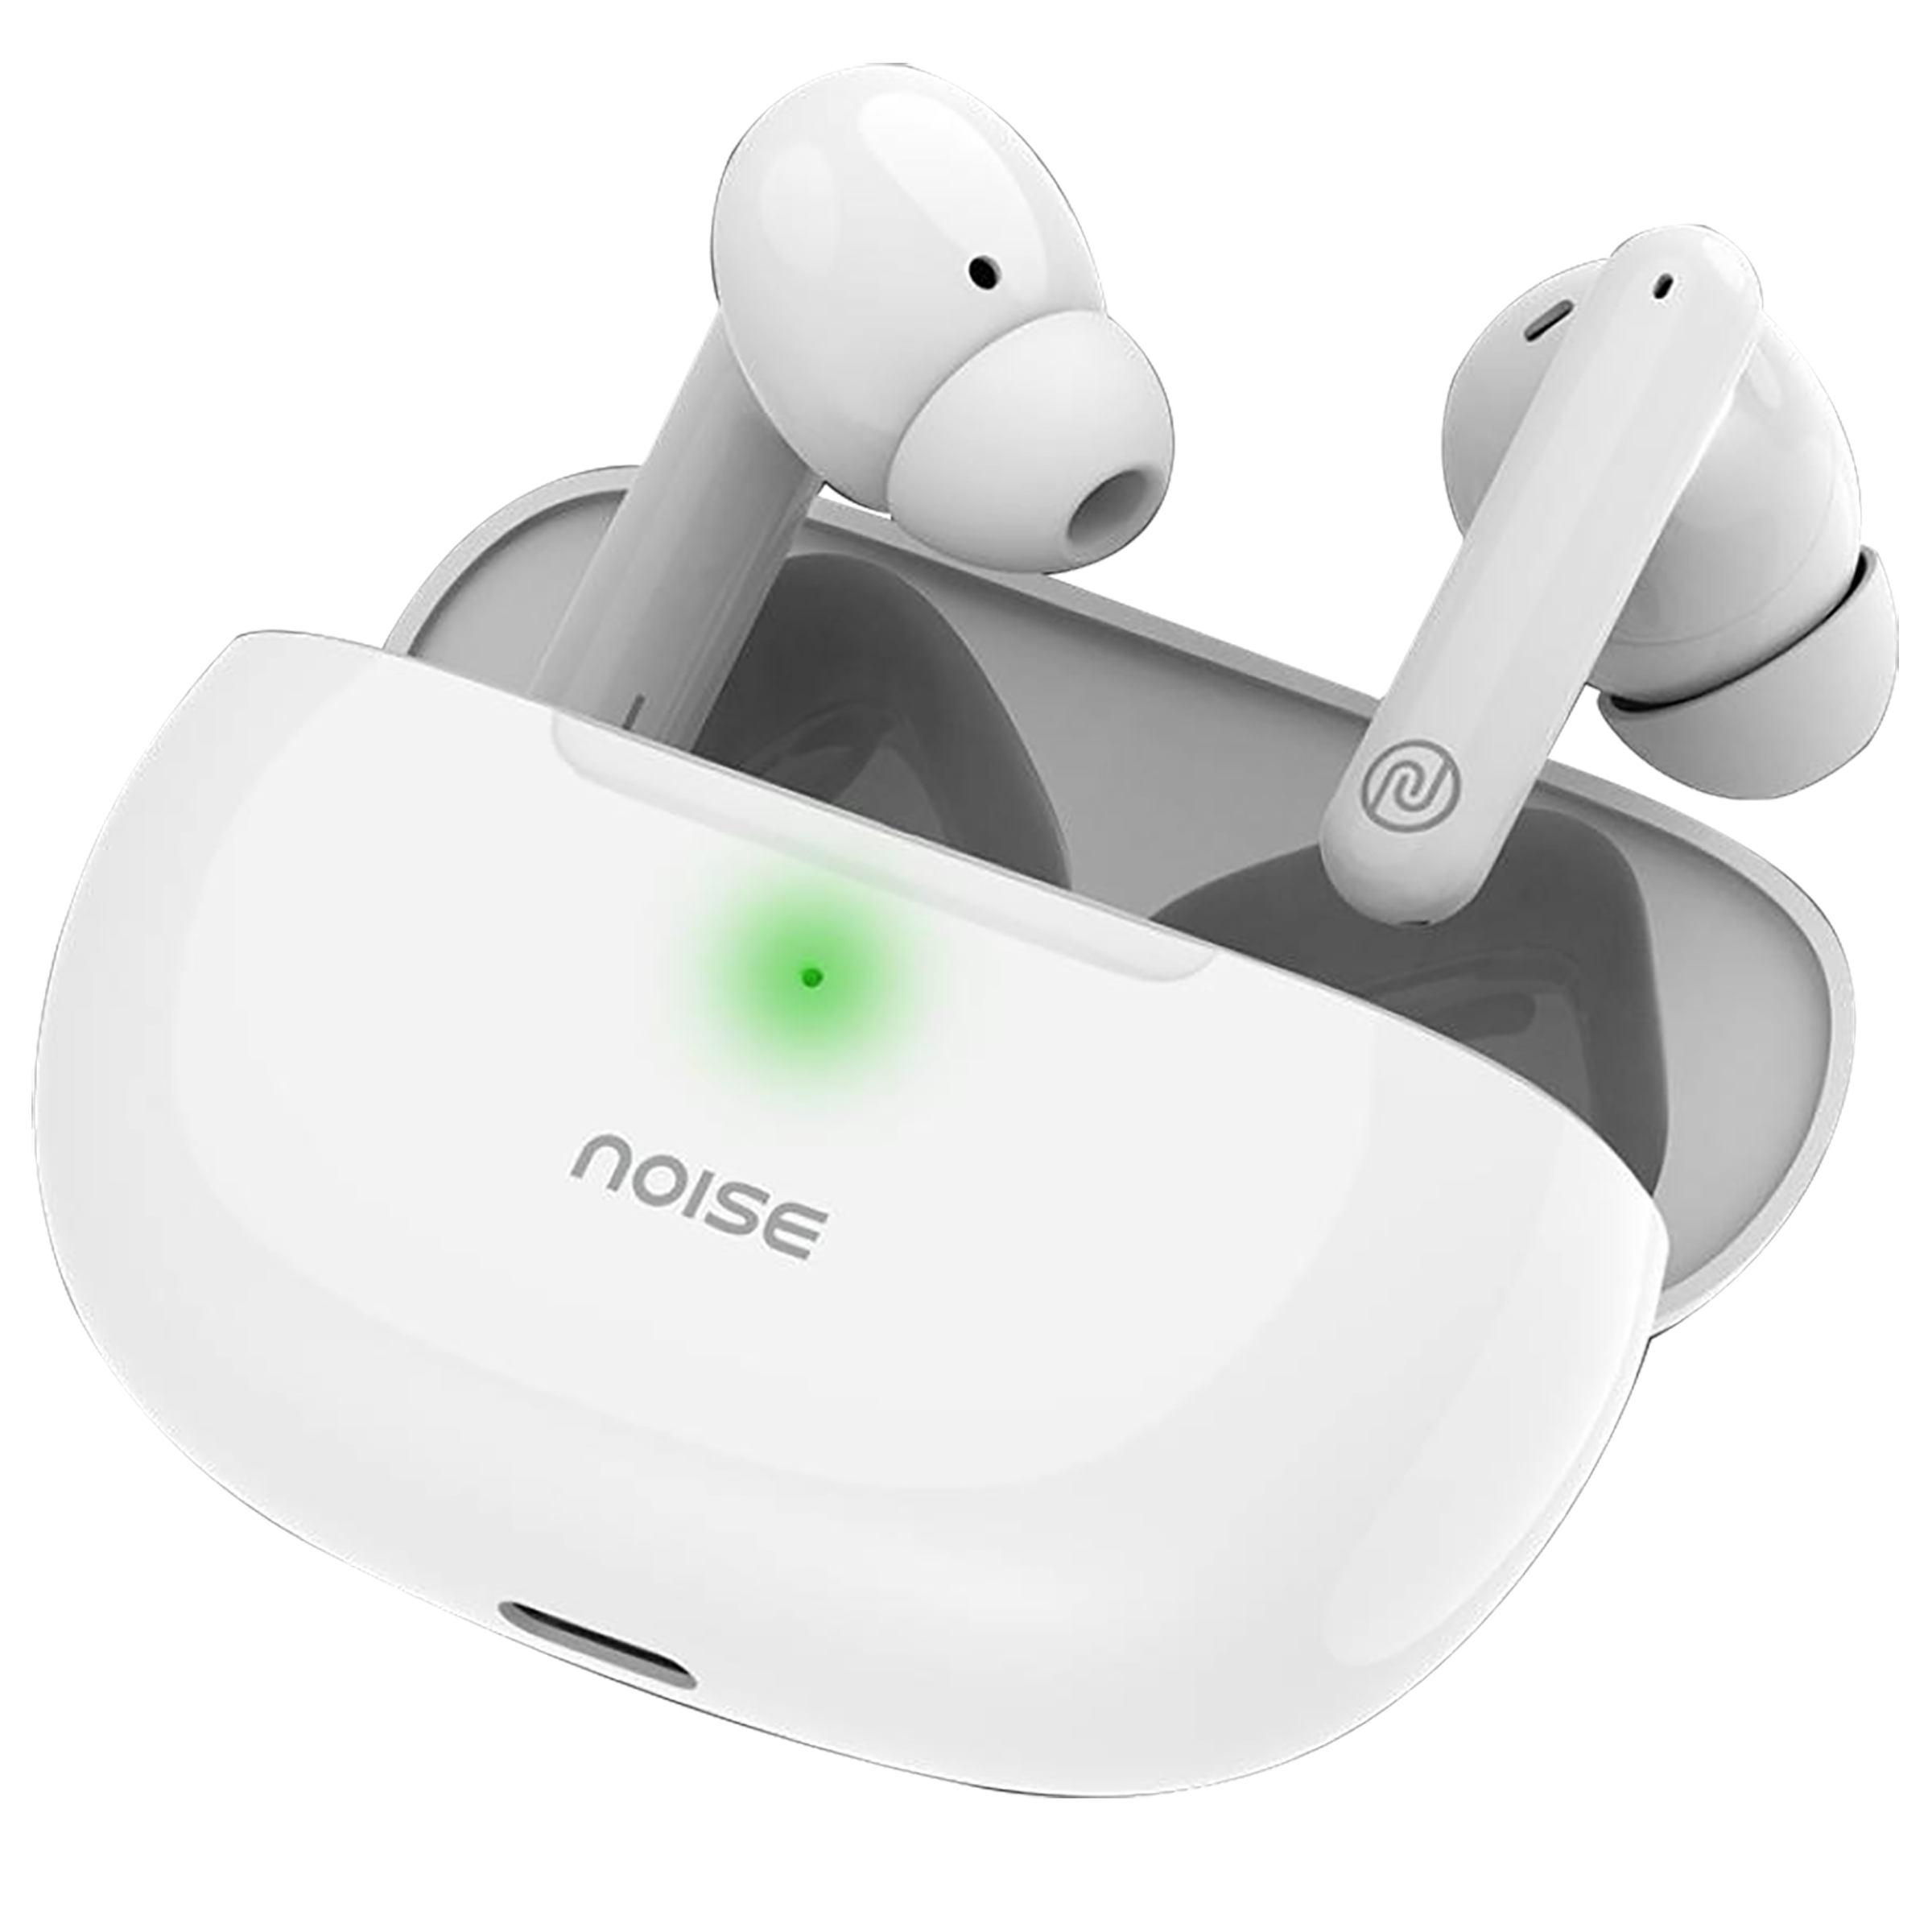 Noise Air Buds Pro AUD-HDPHN-AIRBUDS- In-Ear Truly Wireless Earbuds with Mic (Bluetooth 5.0, Quad Mic, Pearl White)_1